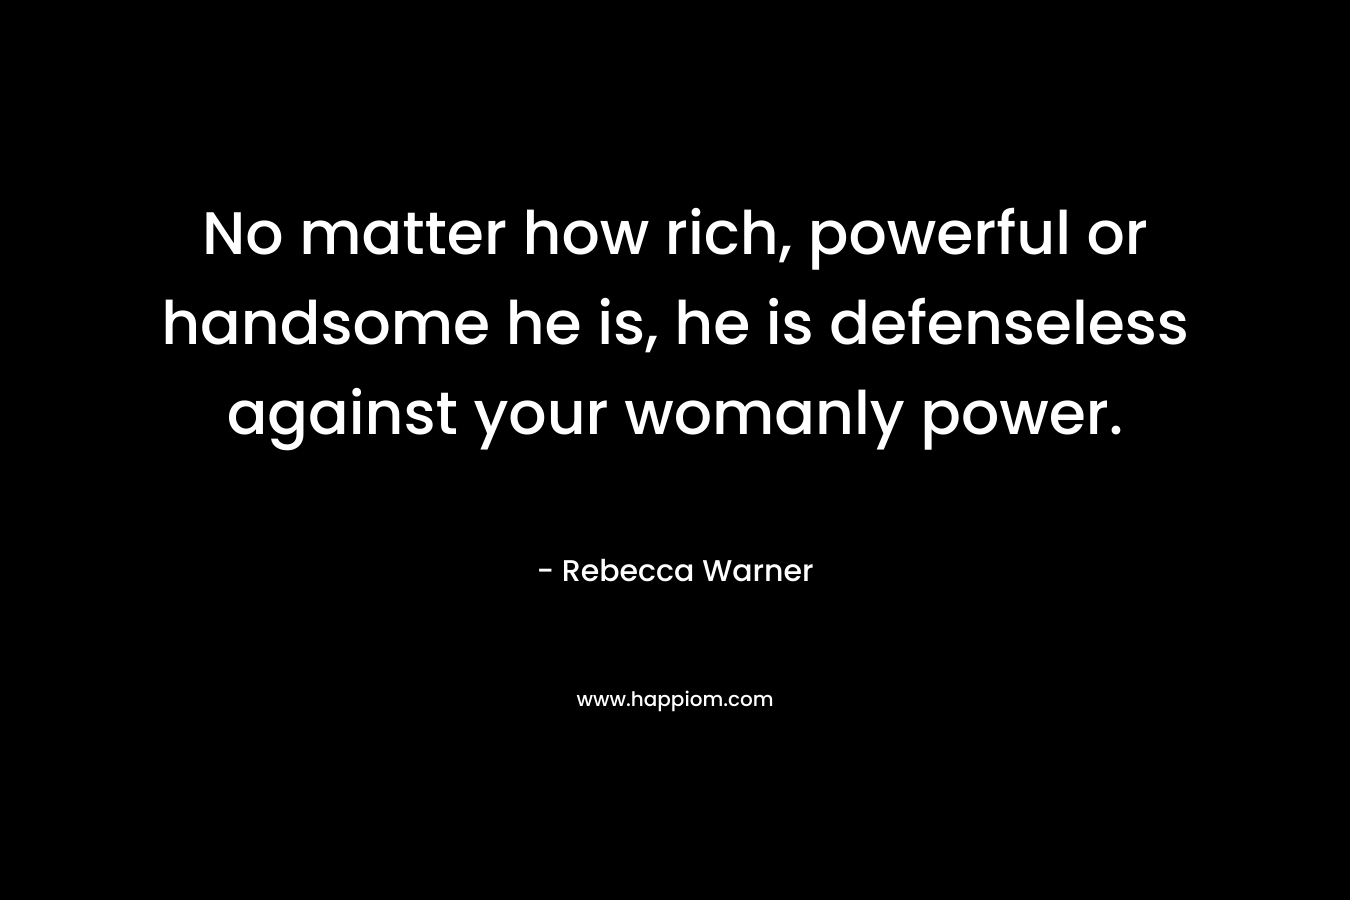 No matter how rich, powerful or handsome he is, he is defenseless against your womanly power.